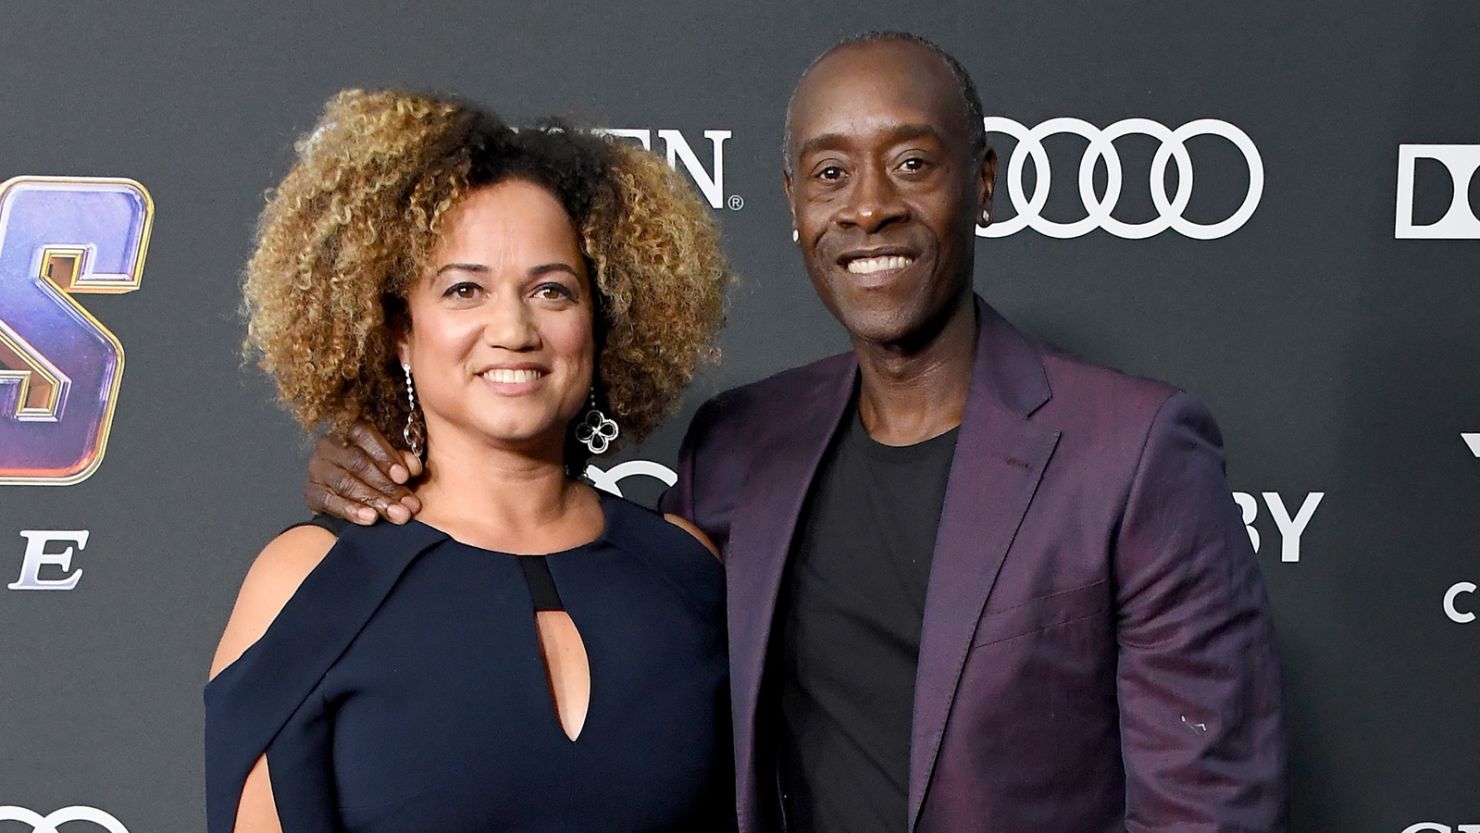 Bridgid Coulter (L) and Don Cheadle got married recently after being in a relationship for more than 20 years.